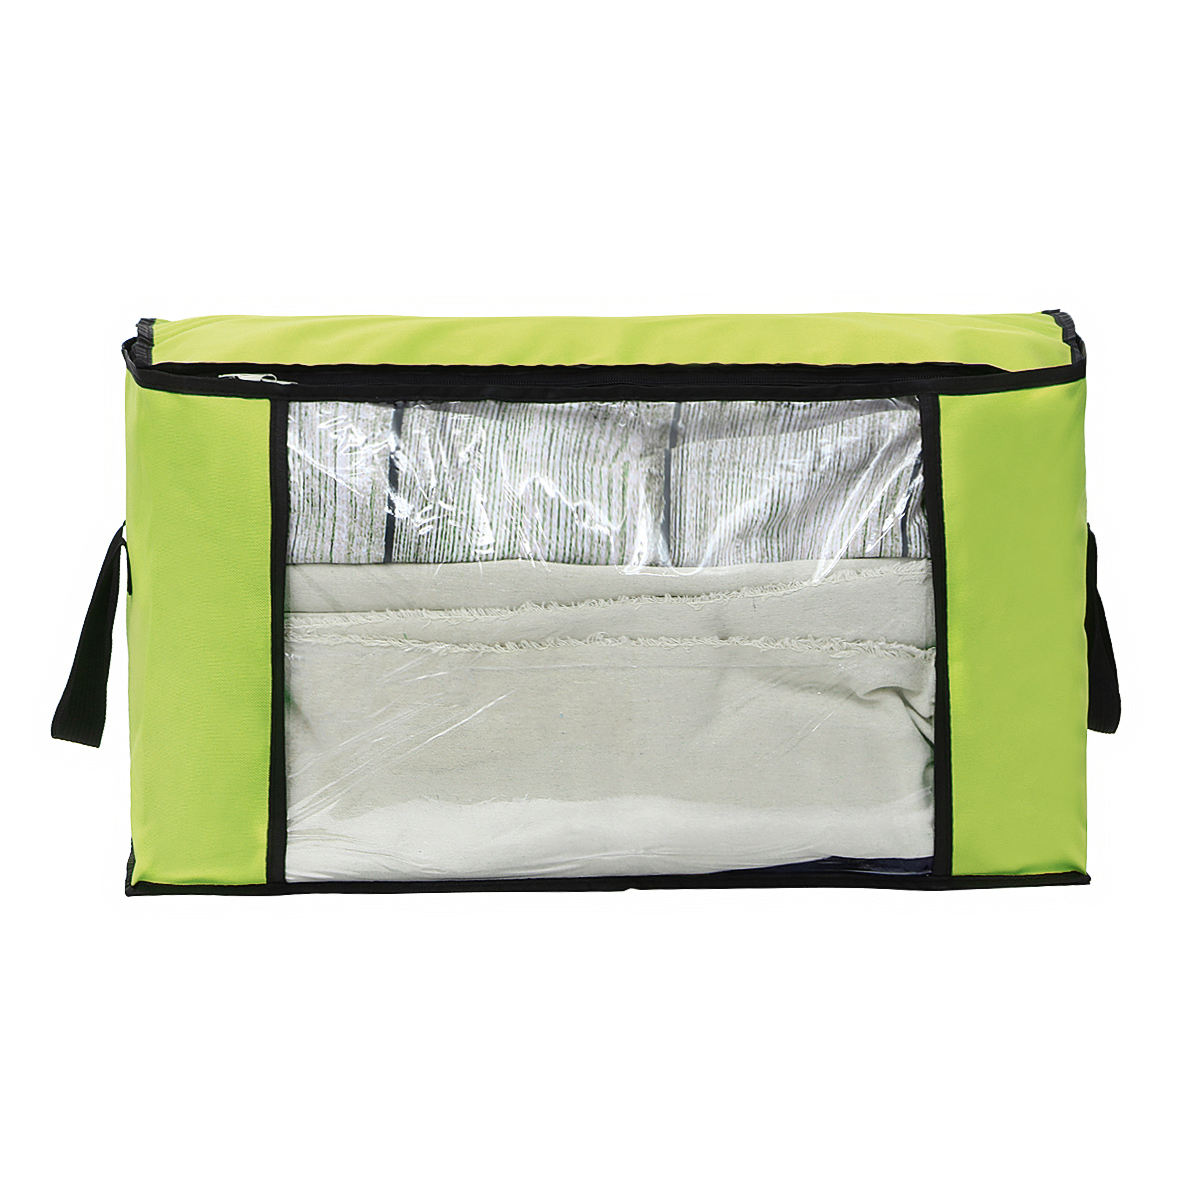 KING-DO-WAY-34-Pcs-90L-Clothing-Storage-Bags-Zipped-Clothes-Organizers-Quilts-Blankets-Bedding-Handb-1855896-9